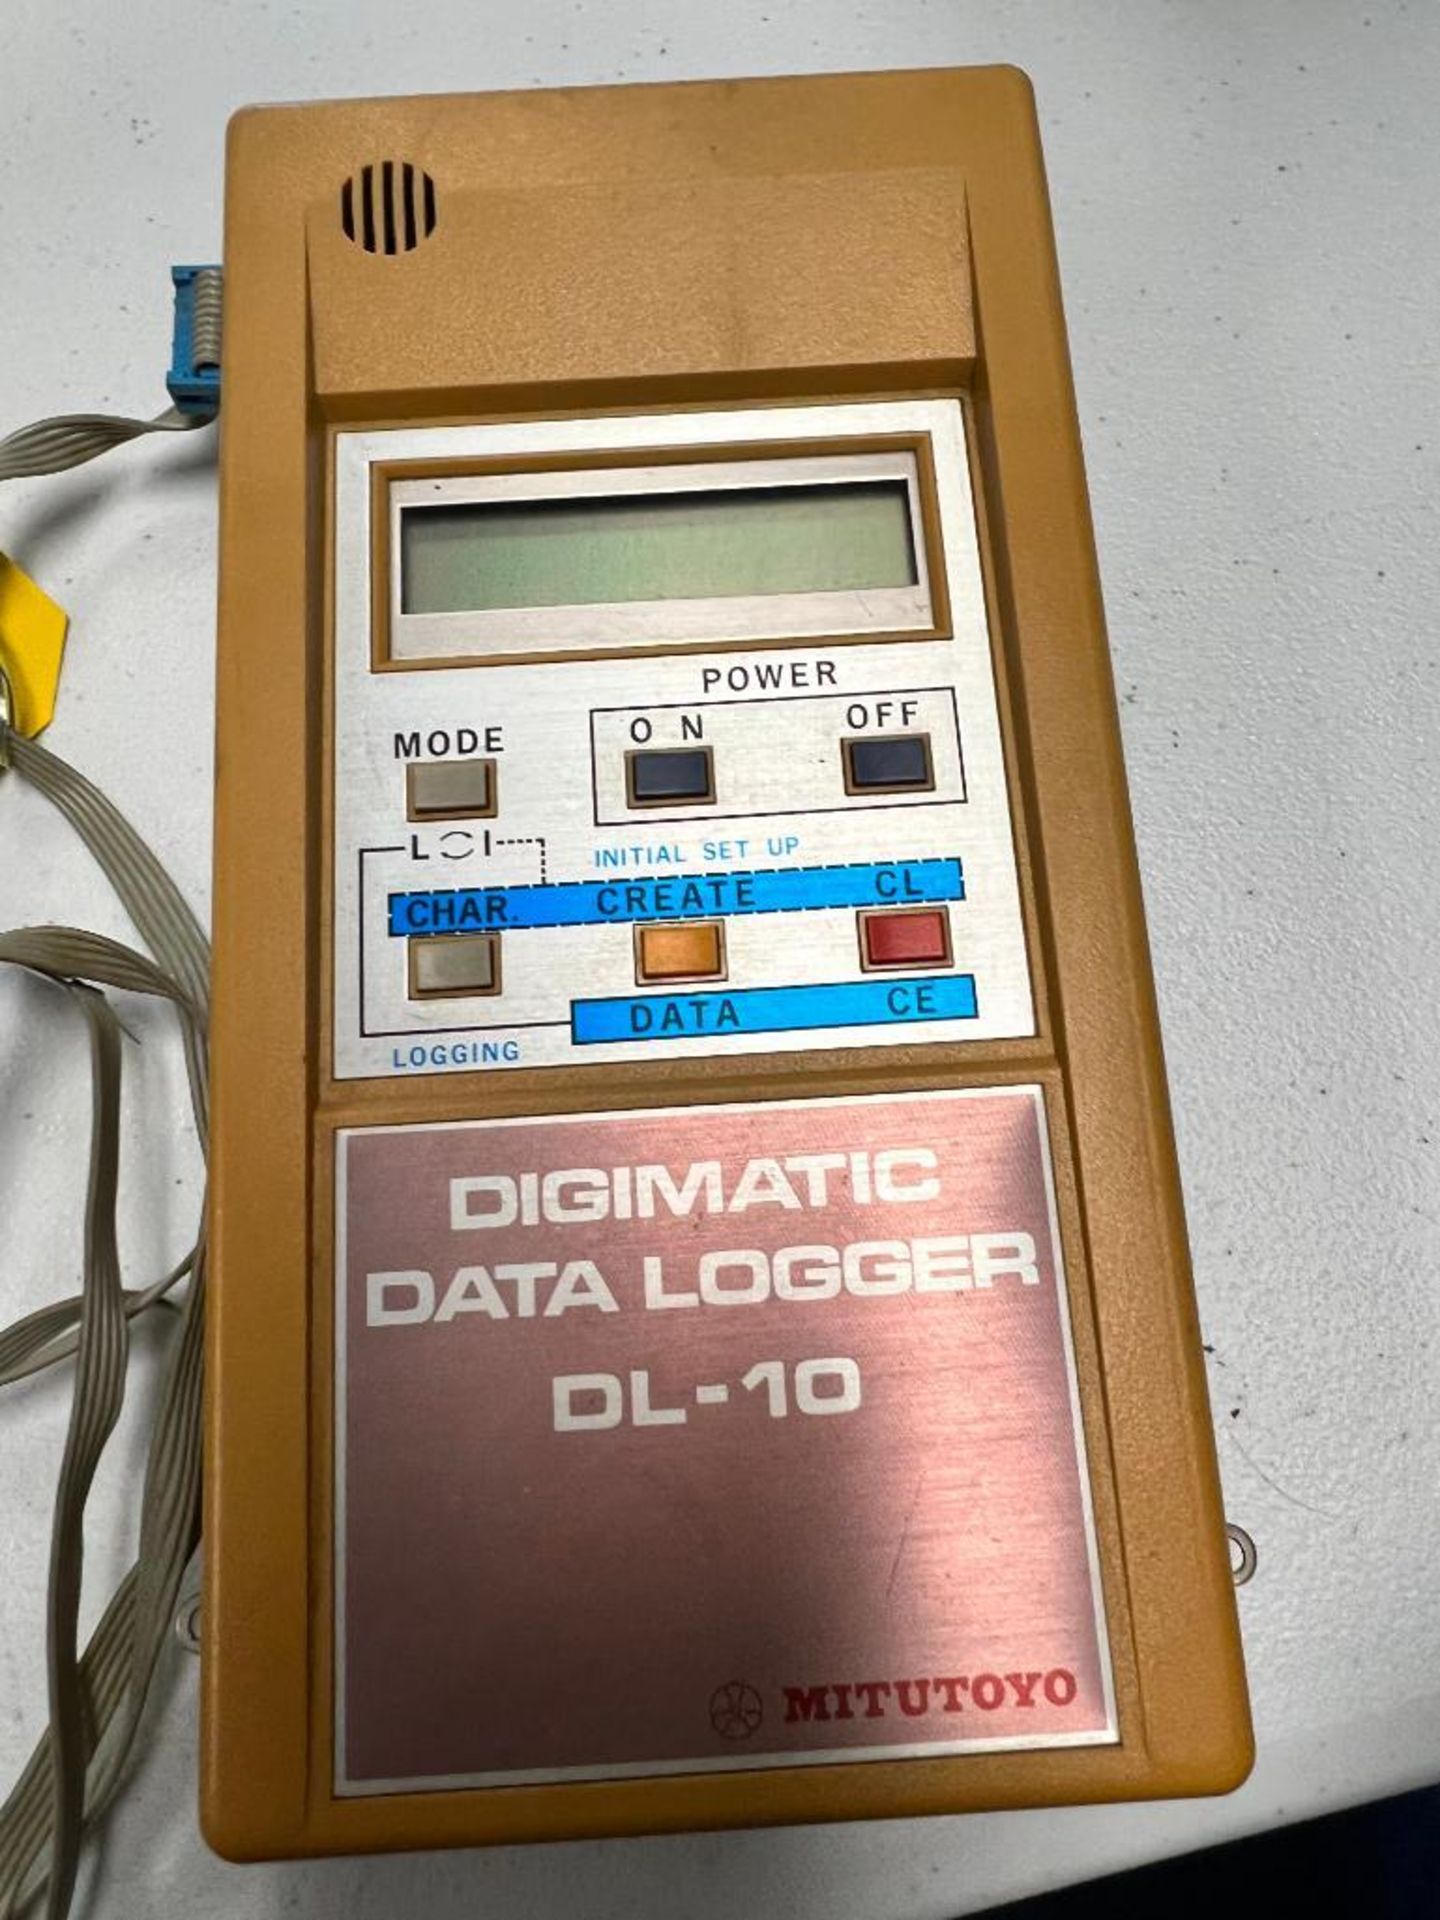 MITUTOYO DIGIMATIC DATA LOGGER DL-10, S/N 4000029